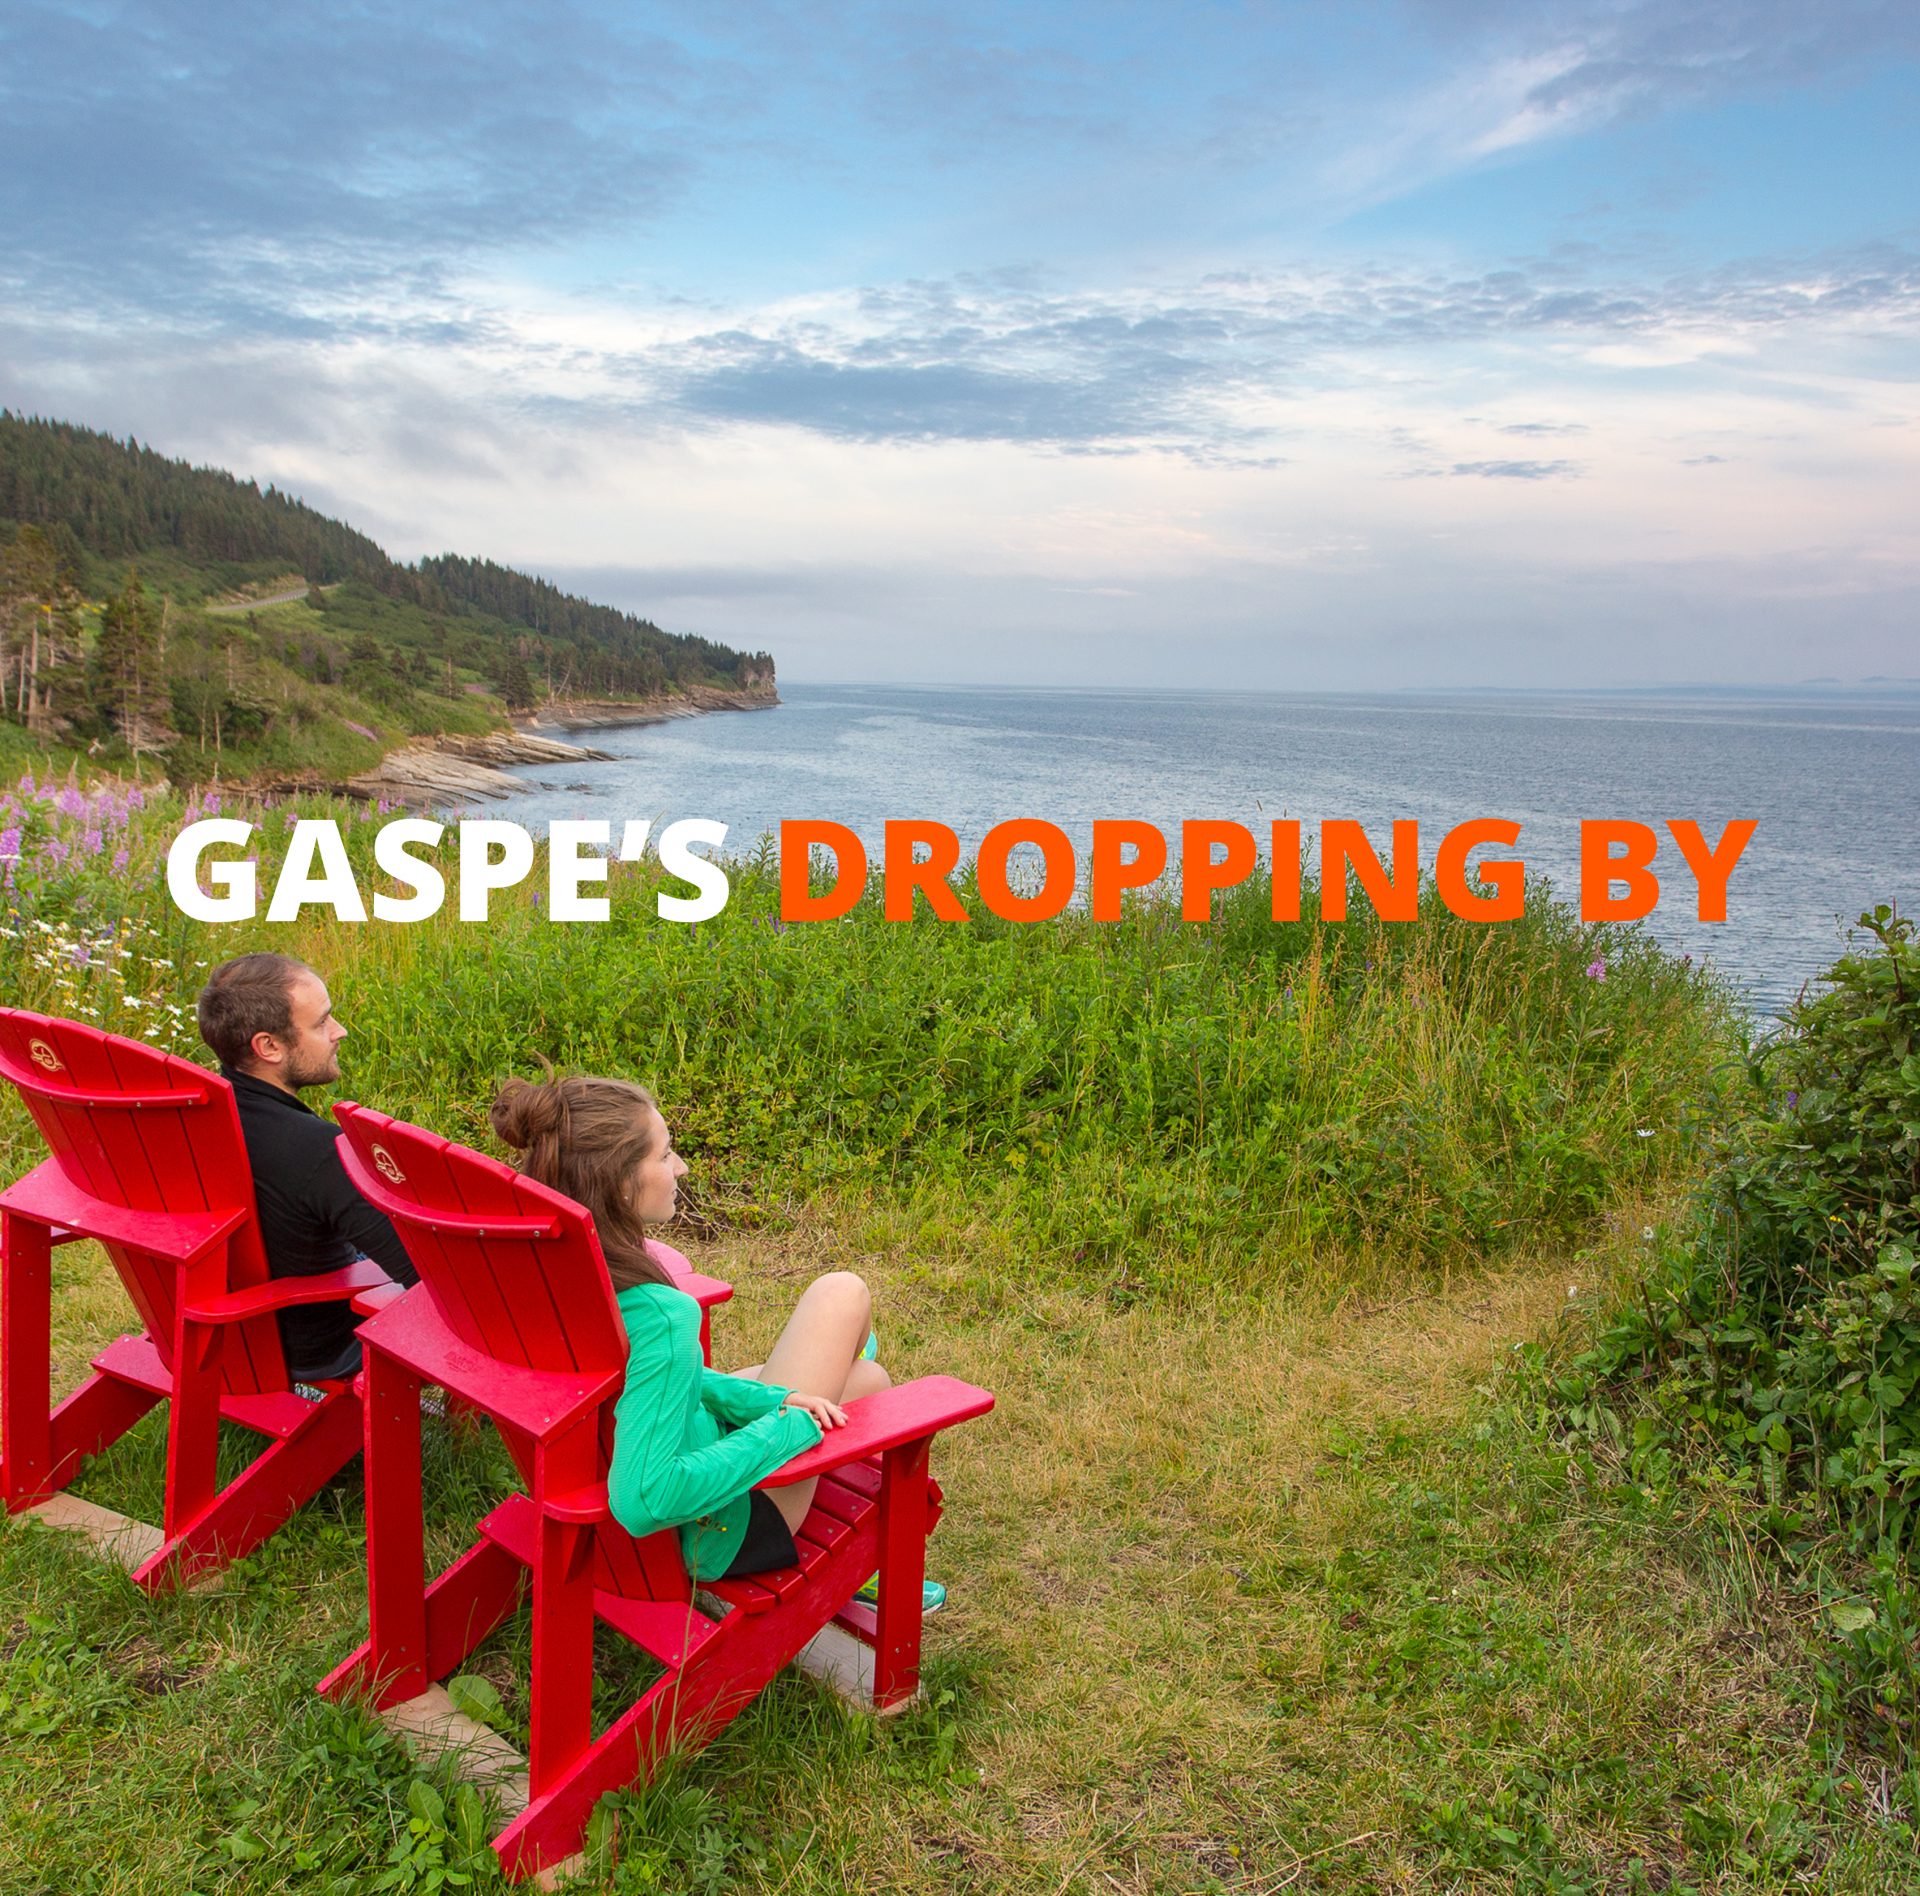 Gaspe’s dropping by : Forillon’s red chairs… at home!